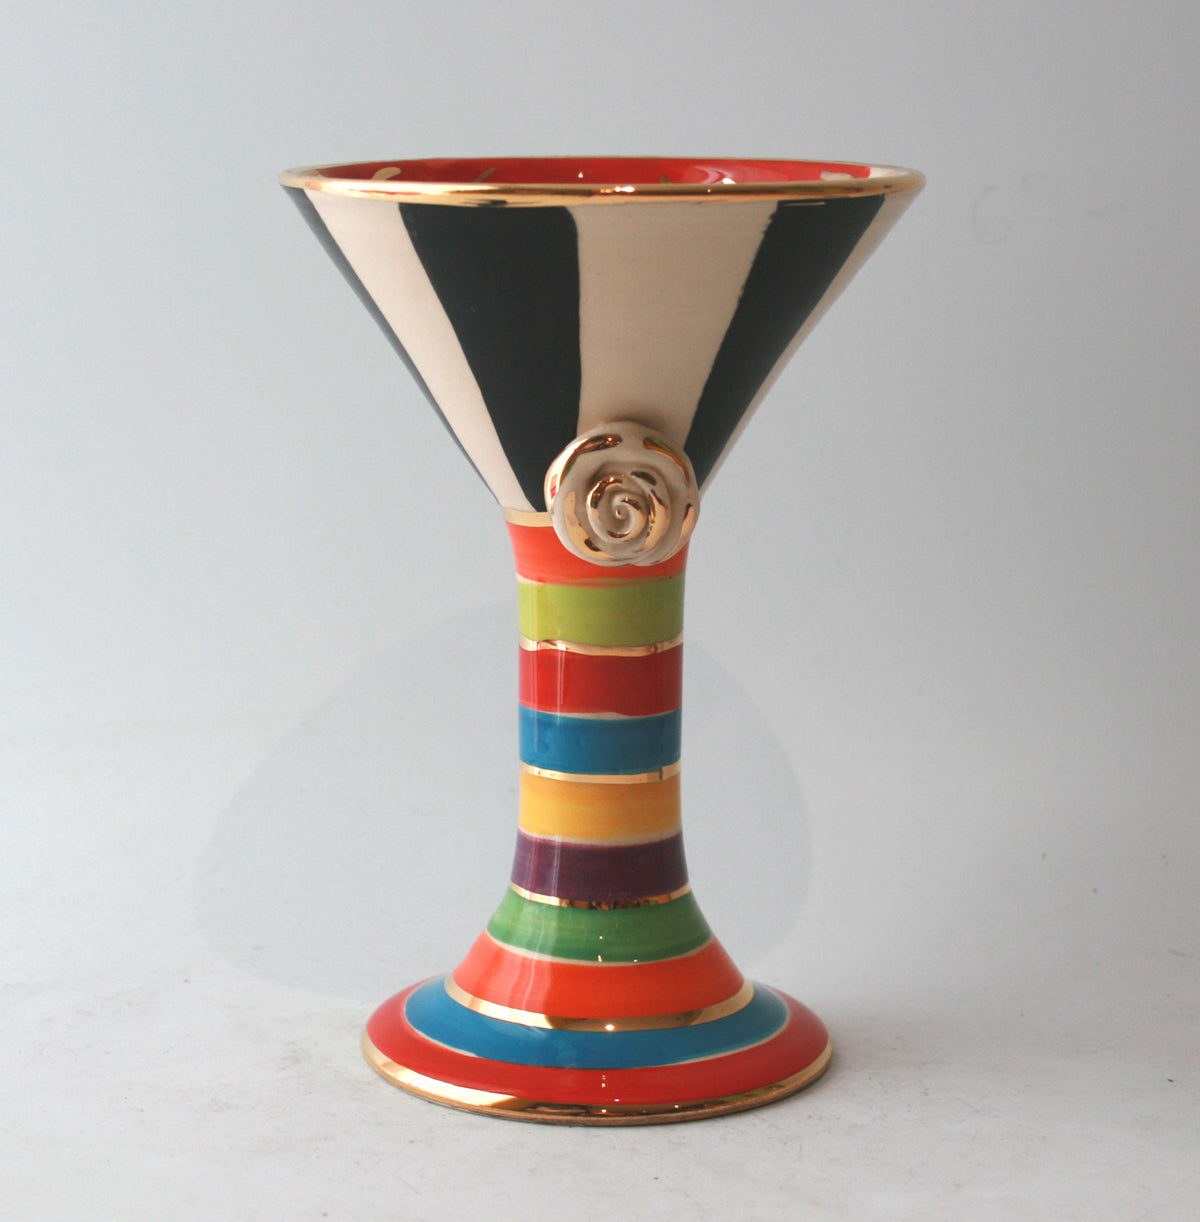 Martini Goblet with Face - Martina